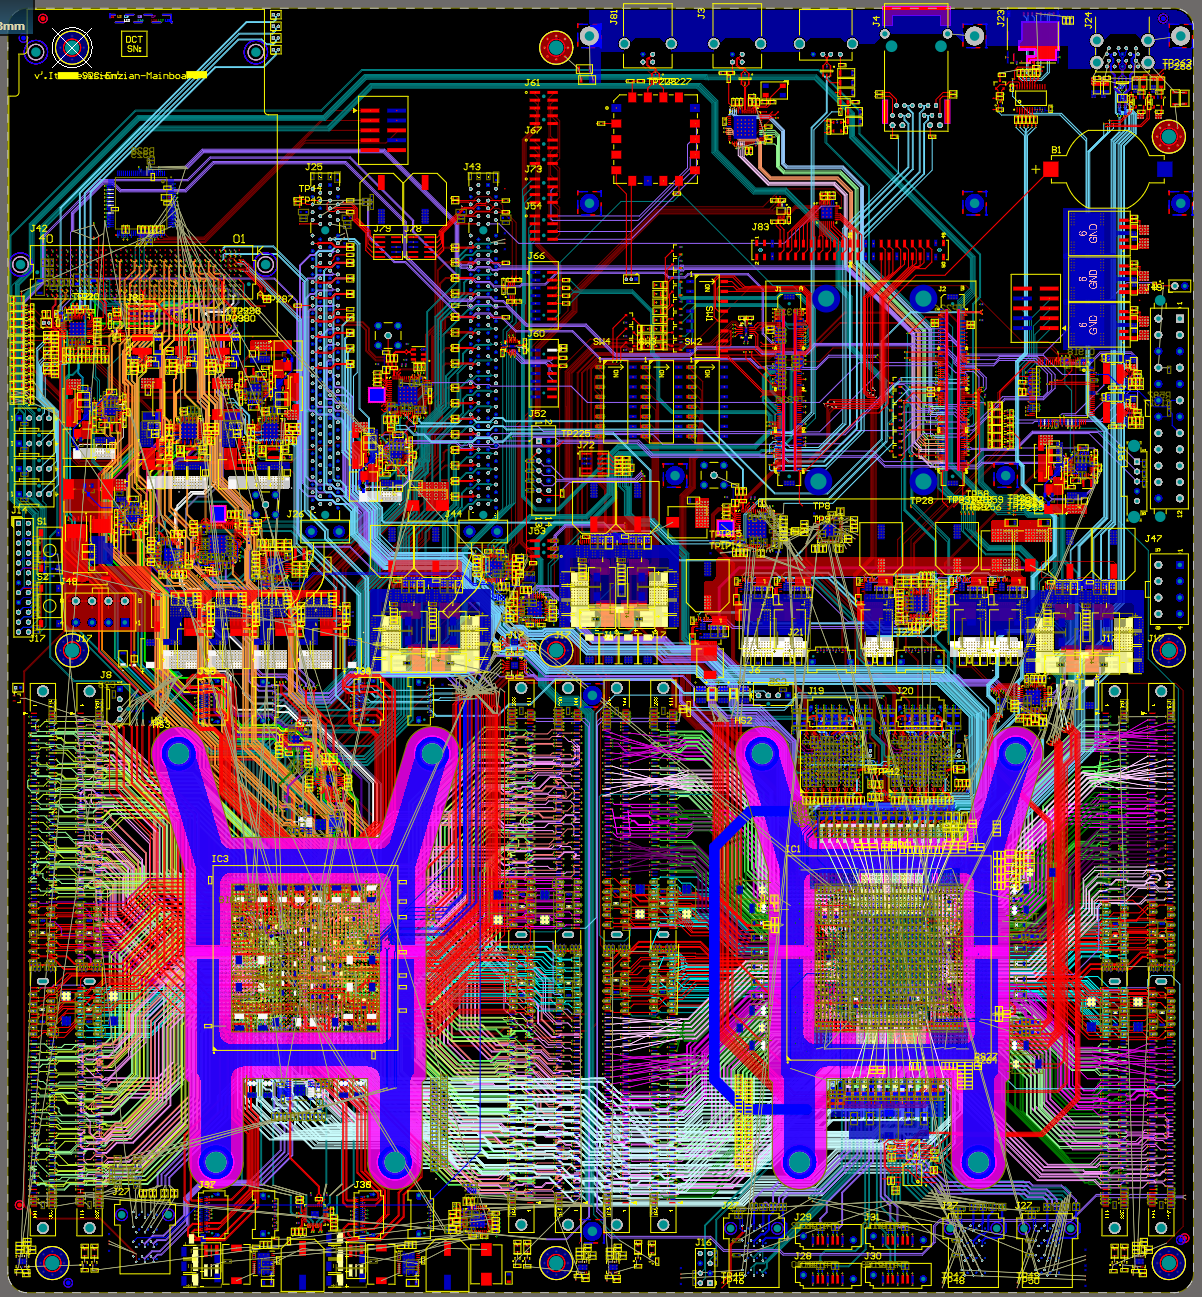 Work in progress physical layout of the Enzian v3 PCB.